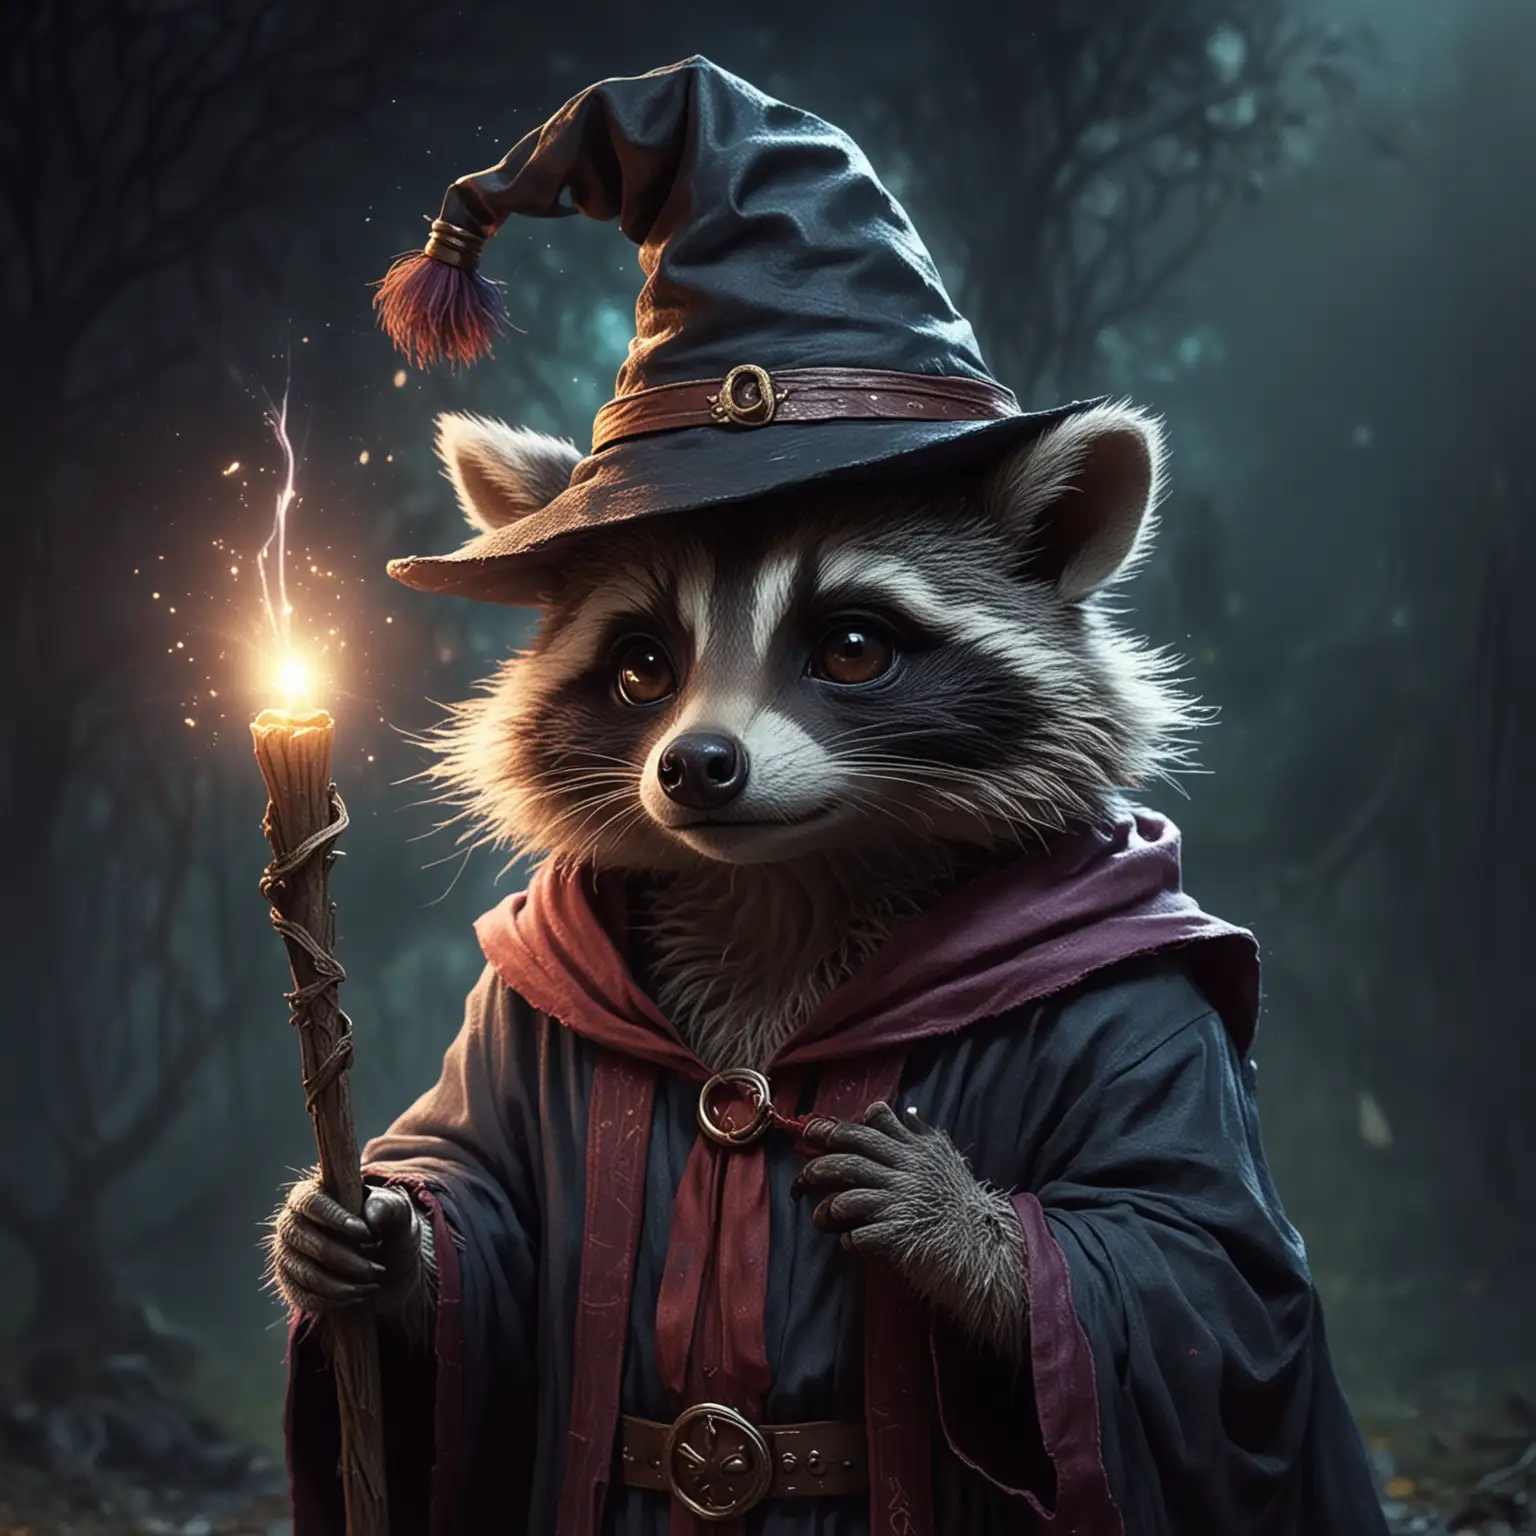 Magical Raccoon Wizard Conjuring Enchantment in Retro 80s Fantasy Scene